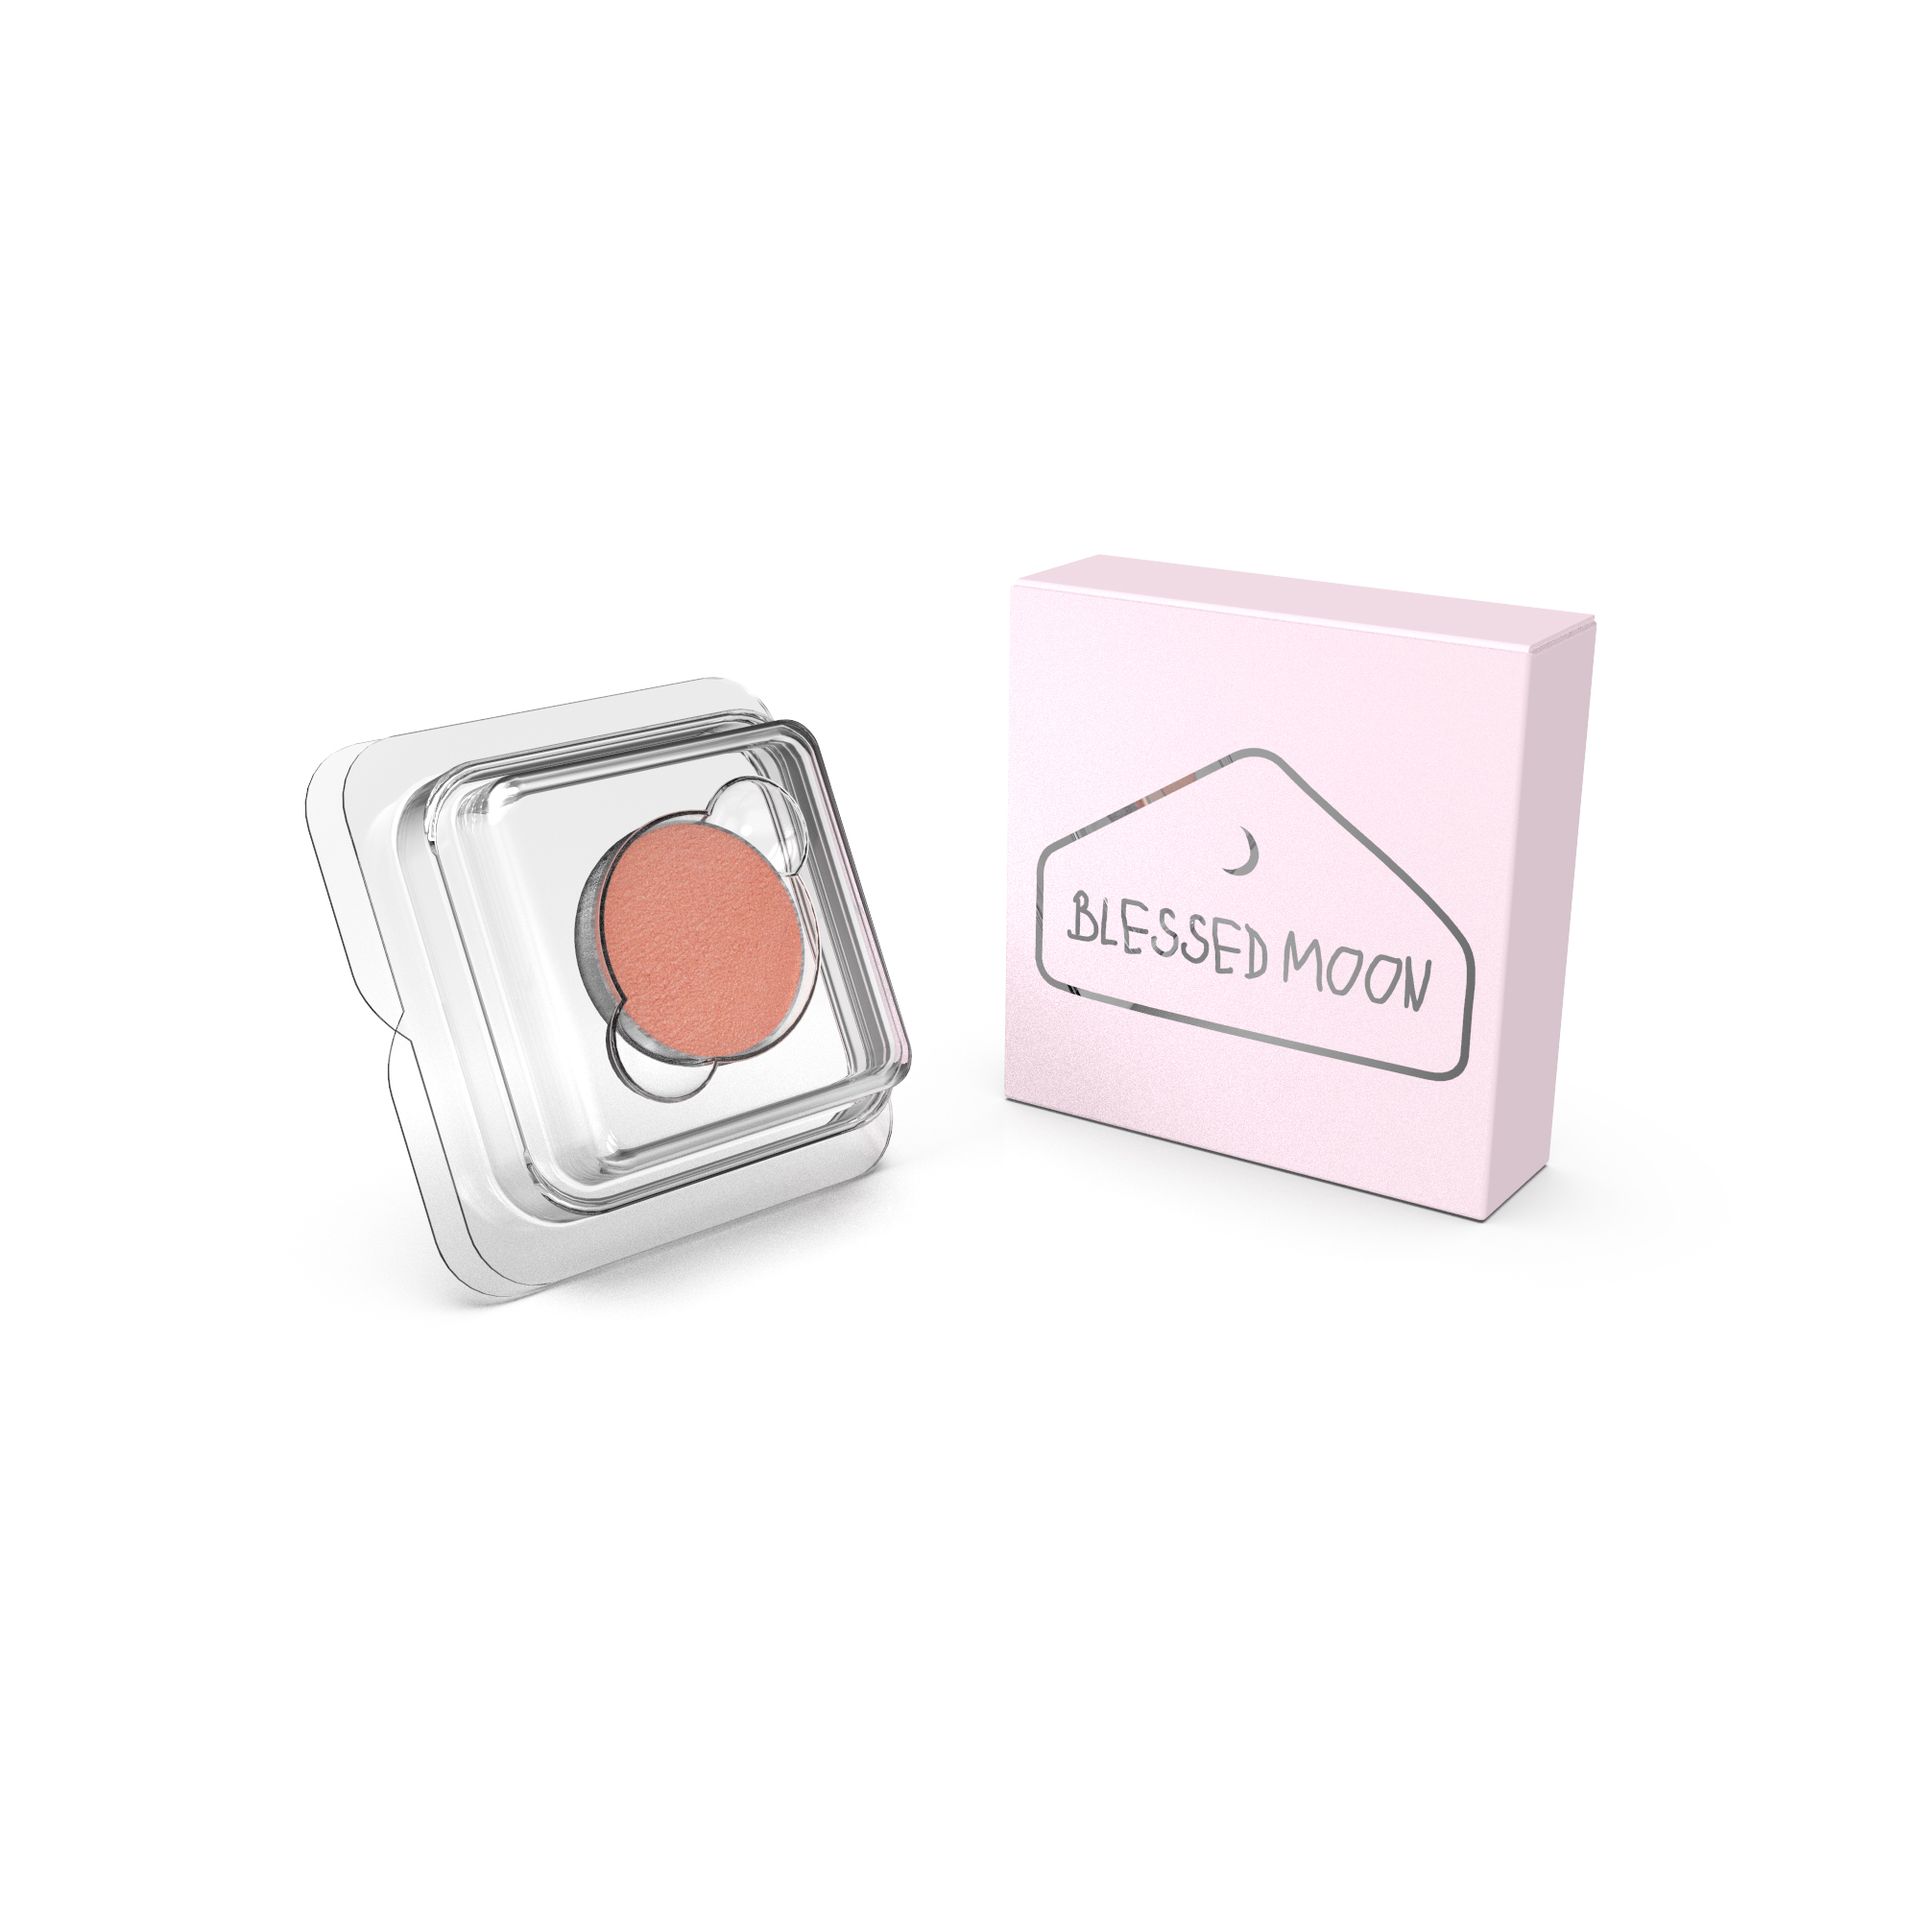 BLESSED MOON CHARMRED Refill - BLUSH #DAY CHIP